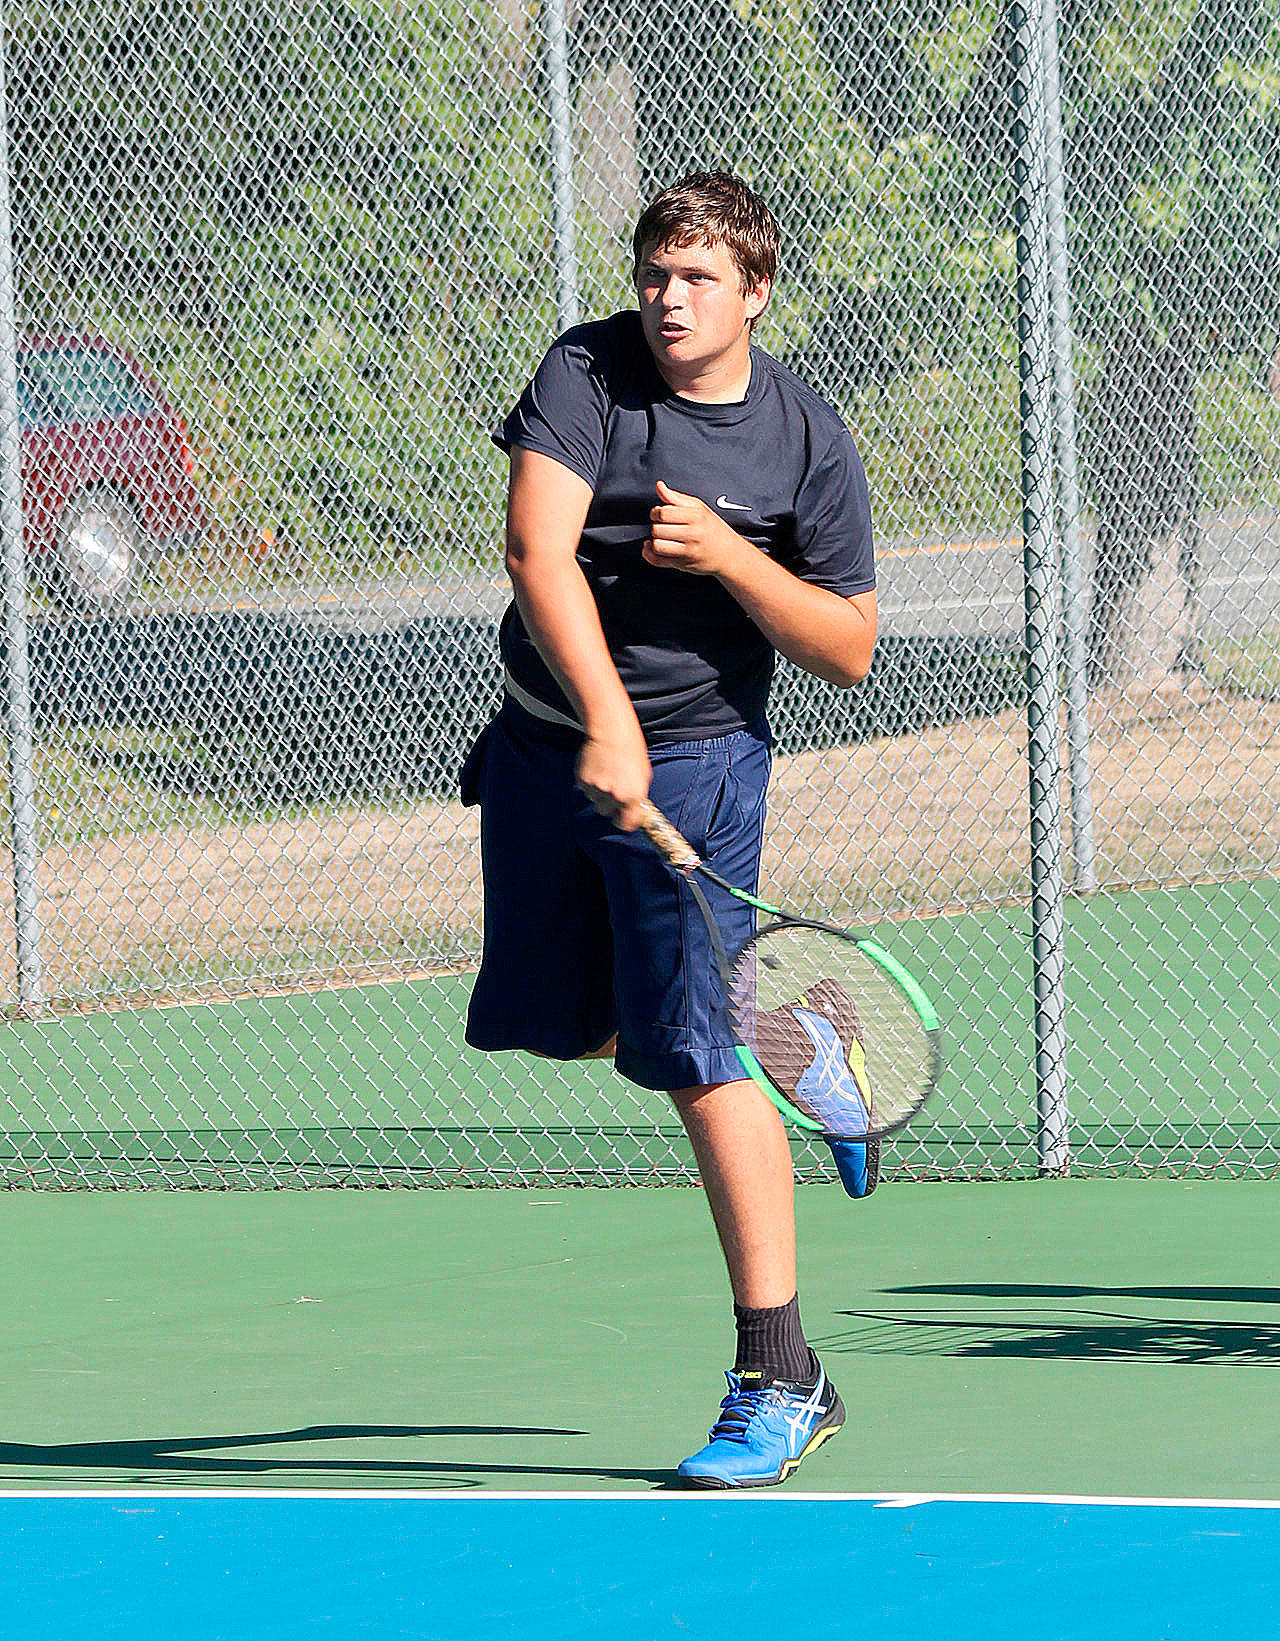 South Whidbey’s Ranger Buck and the Falcon tennis team had their season postponed recently. (File Photo)